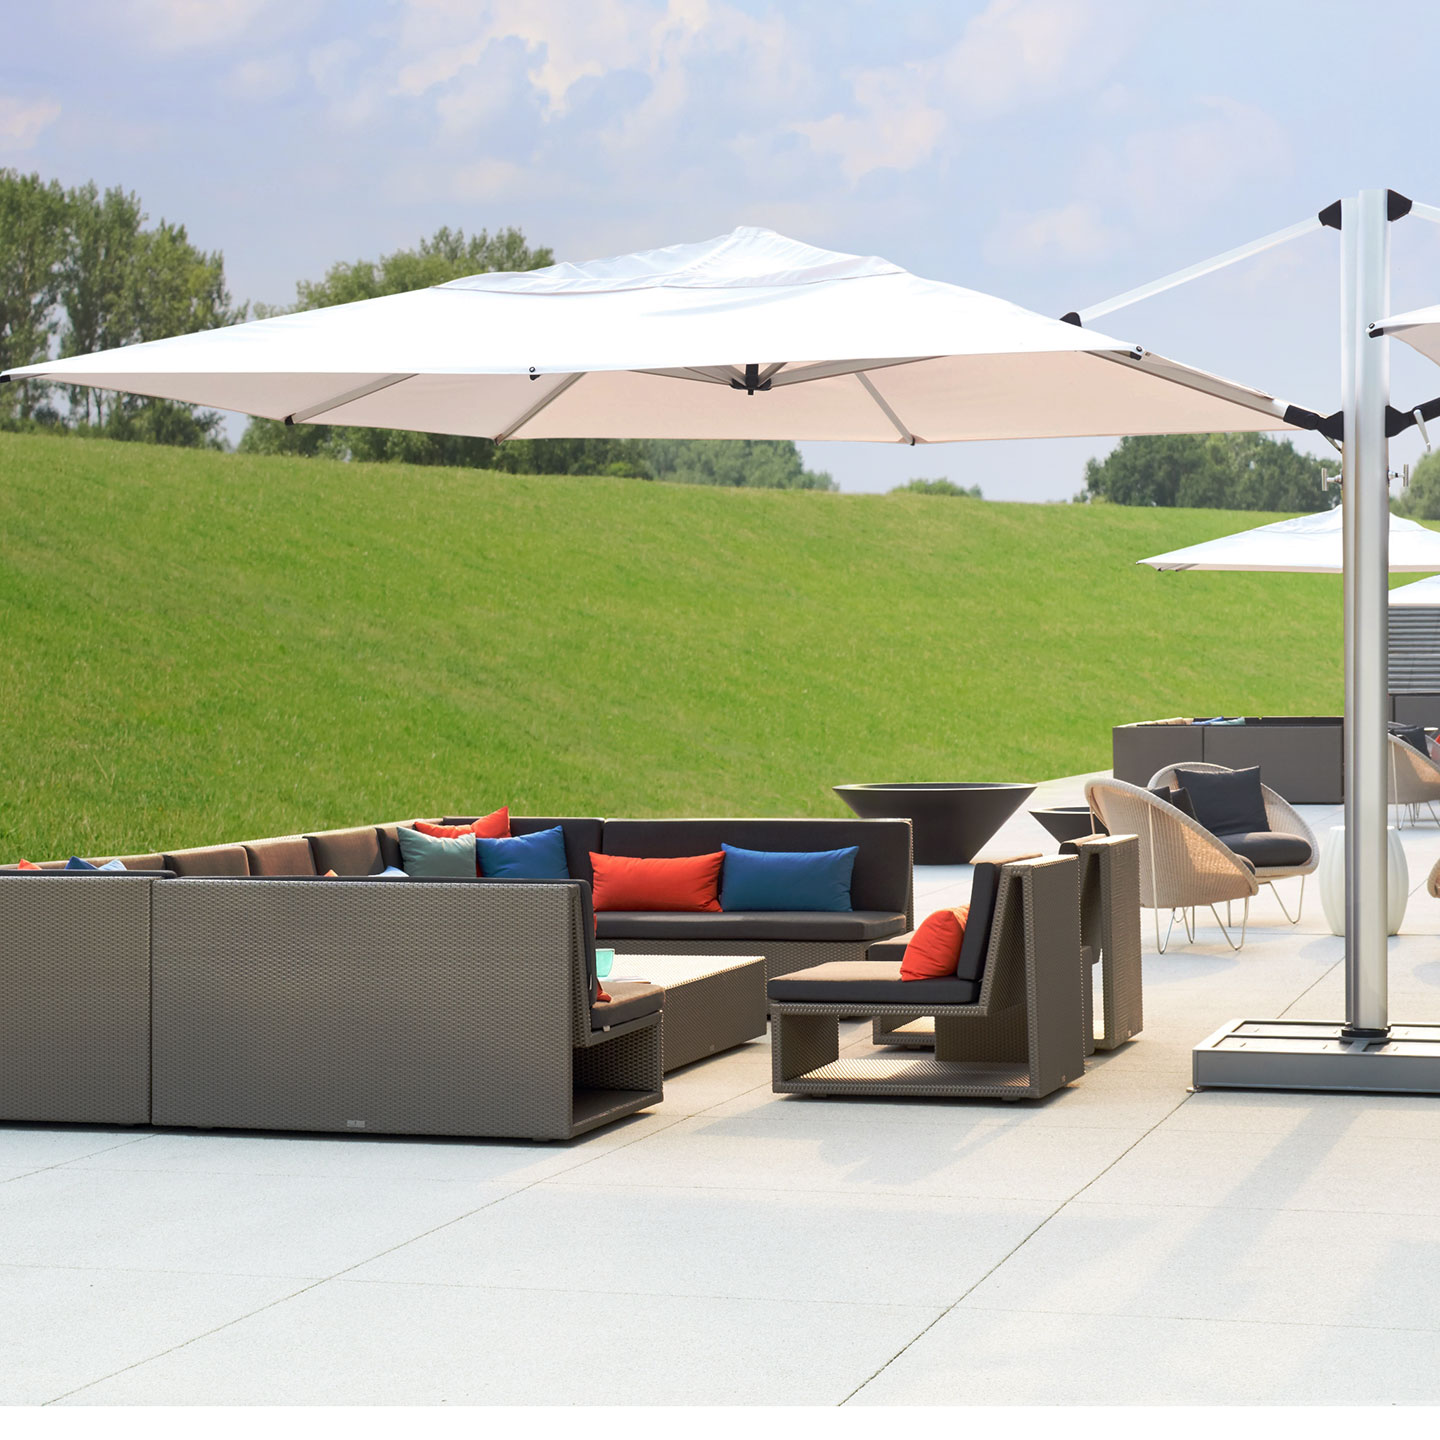 Haworth Janus Titan Umbrella Accessories on outdoor seating area covering outdoor sectional 